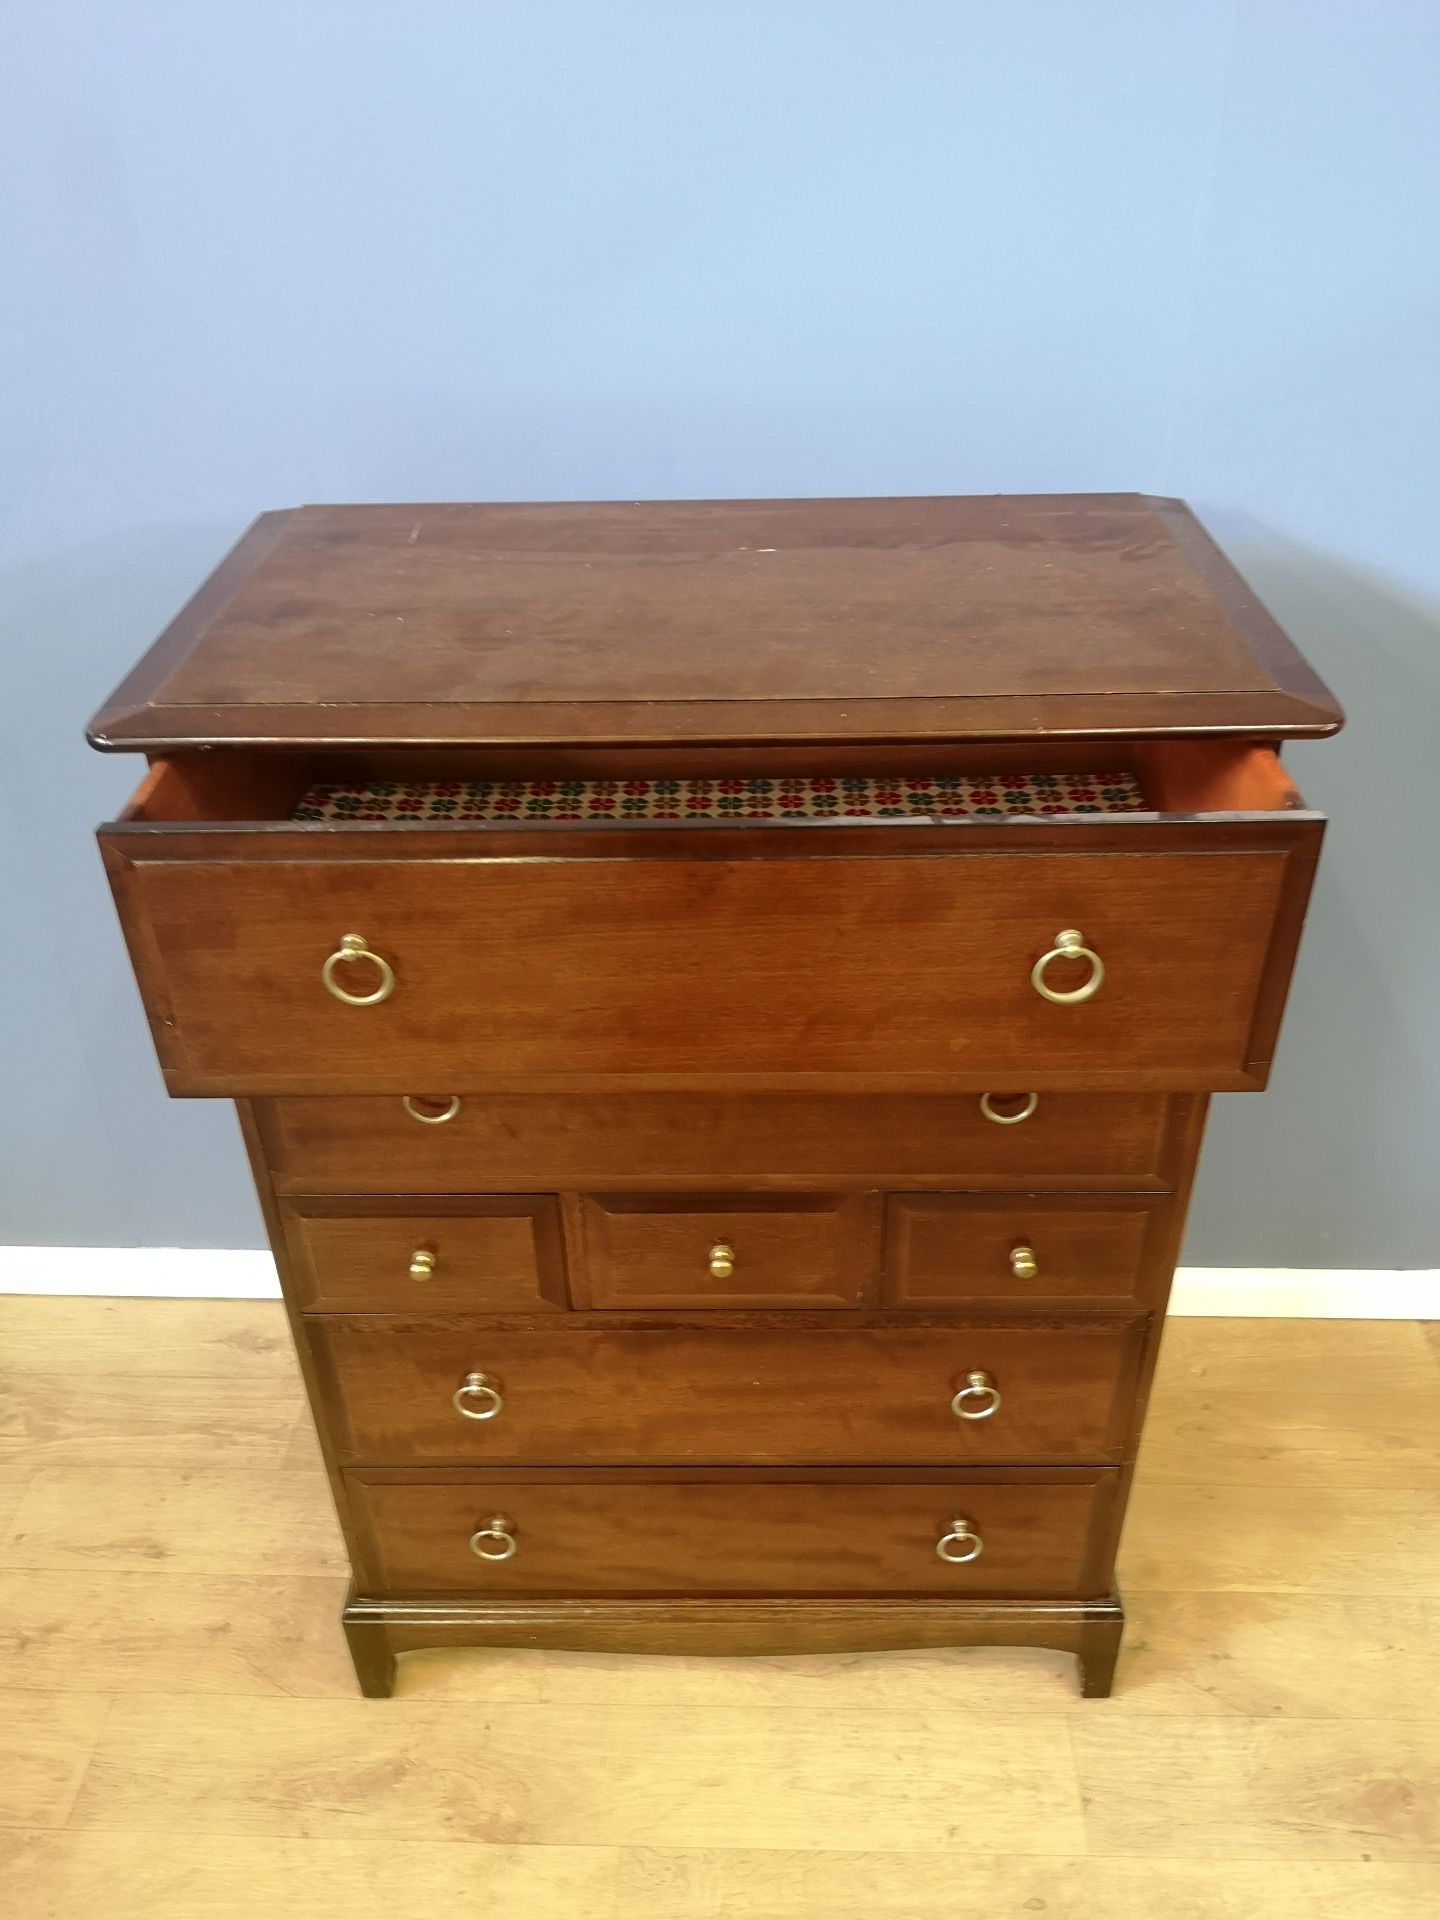 Stag chest of drawers - Image 6 of 6